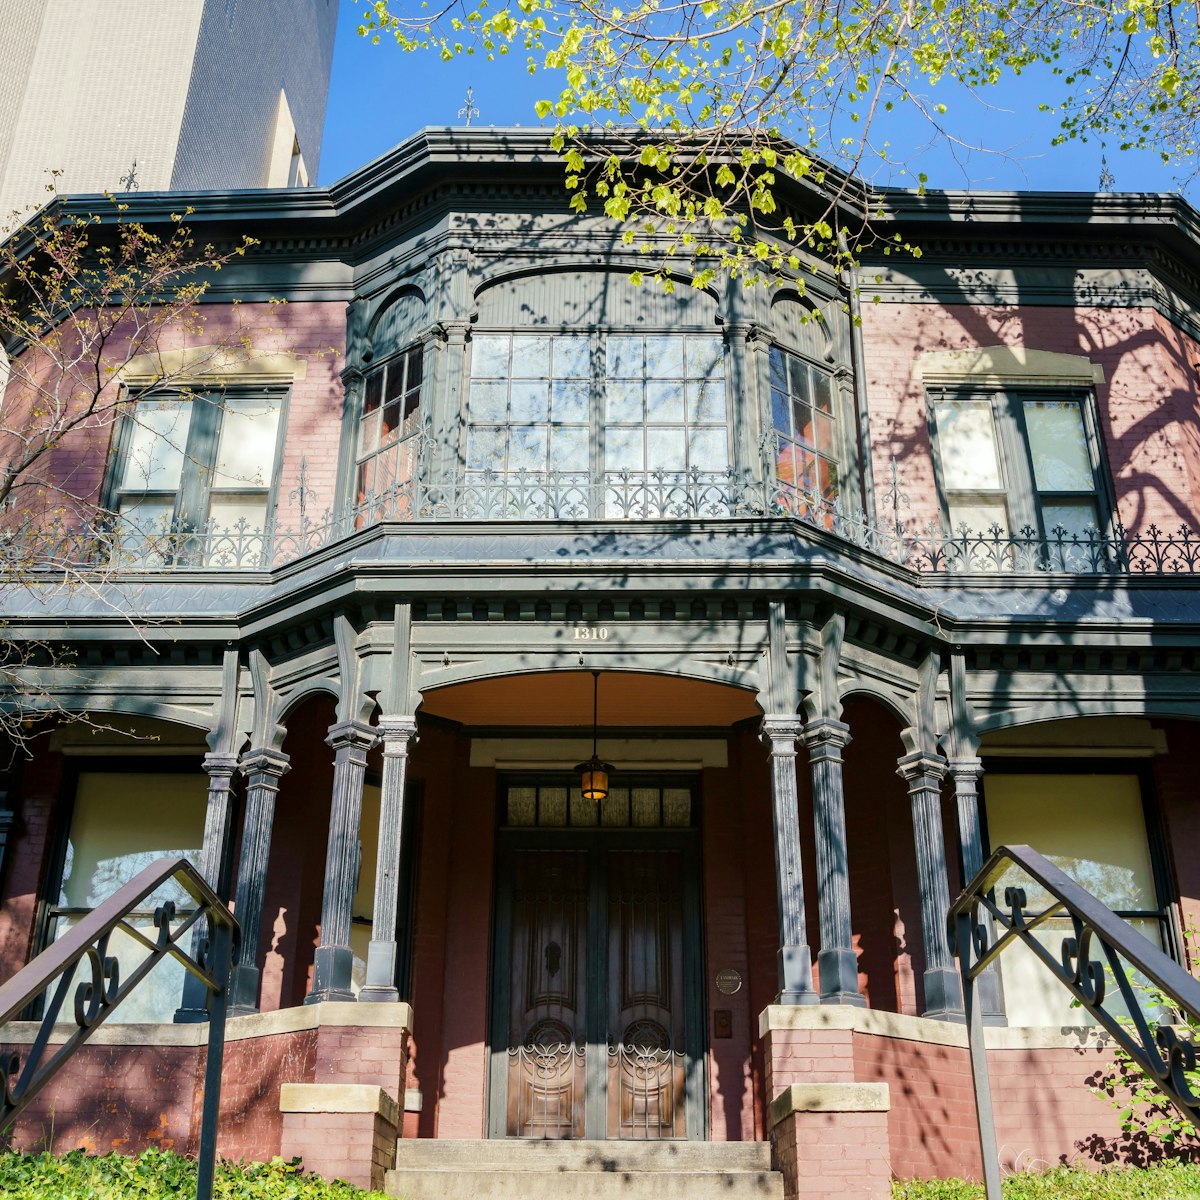 Denver, MAY 3: Exterior view of the Byers-Evans House Museum on MAY 3, 2017 at Denver, Colorado; Shutterstock ID 1150914149; your: Bridget Brown; gl: 65050; netsuite: Online Editorial; full: POI Image Update